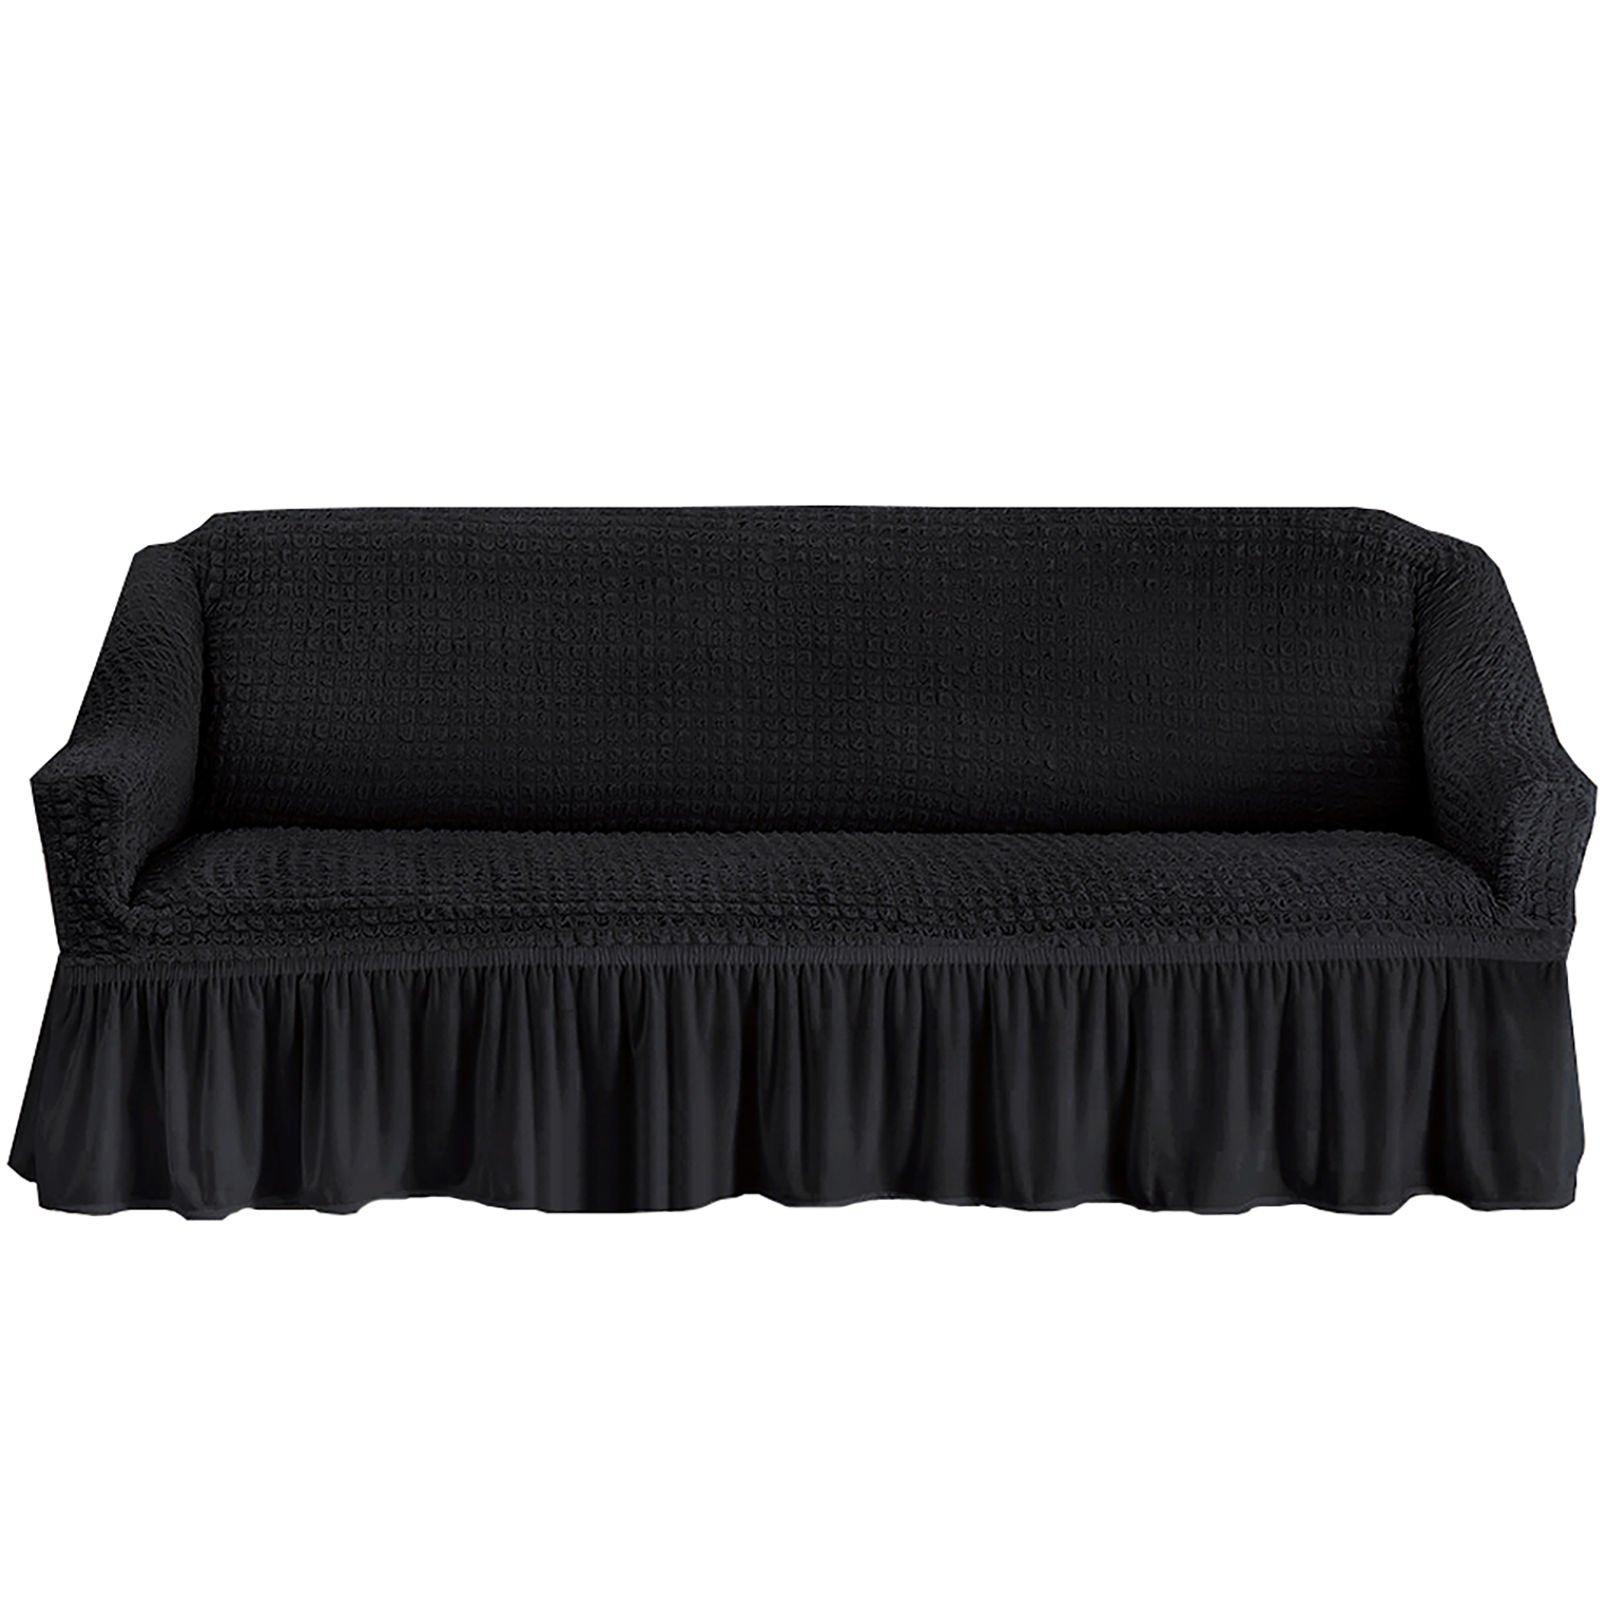 Stretch Sofa Slipcover, 3 Seater Sofa Slipcovers With Skirt With Armless Soft Sofa Cover Elastic Straps Sofa Slipcover For Living Room Kids Pets-black-Small